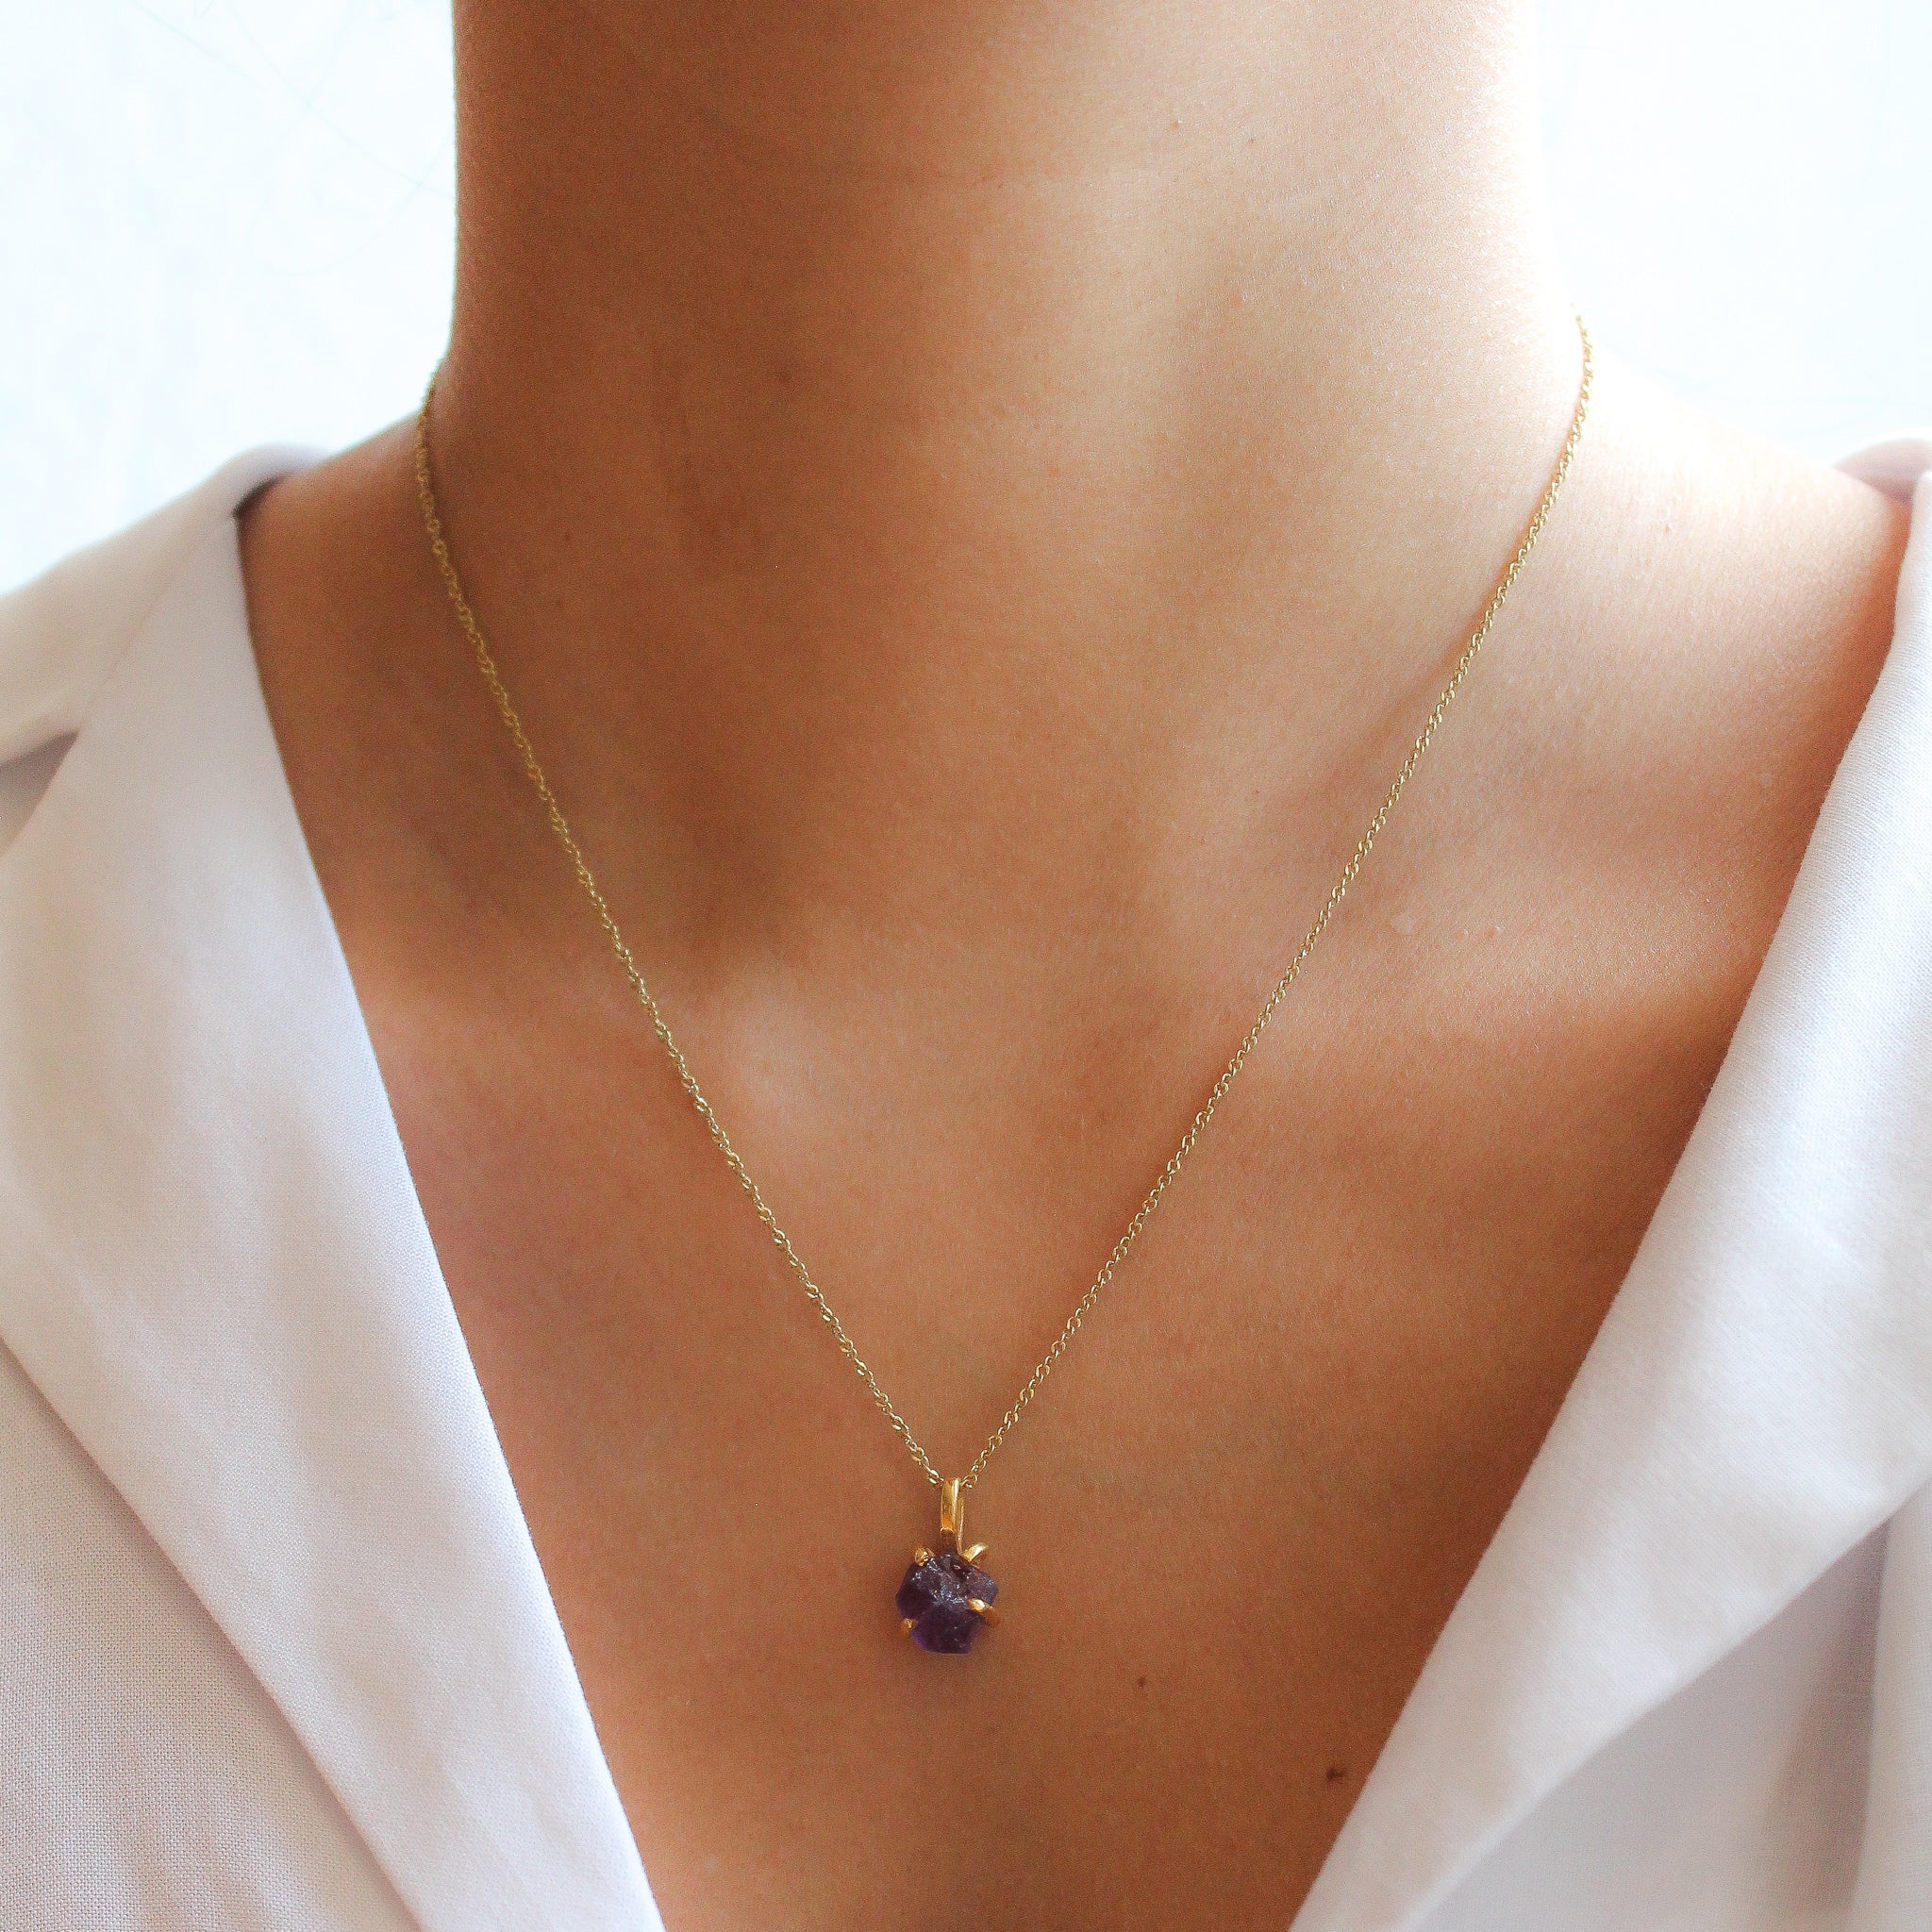 LITTLE CHARM NECKLACE - AMETHYST (GOLD PLATED)